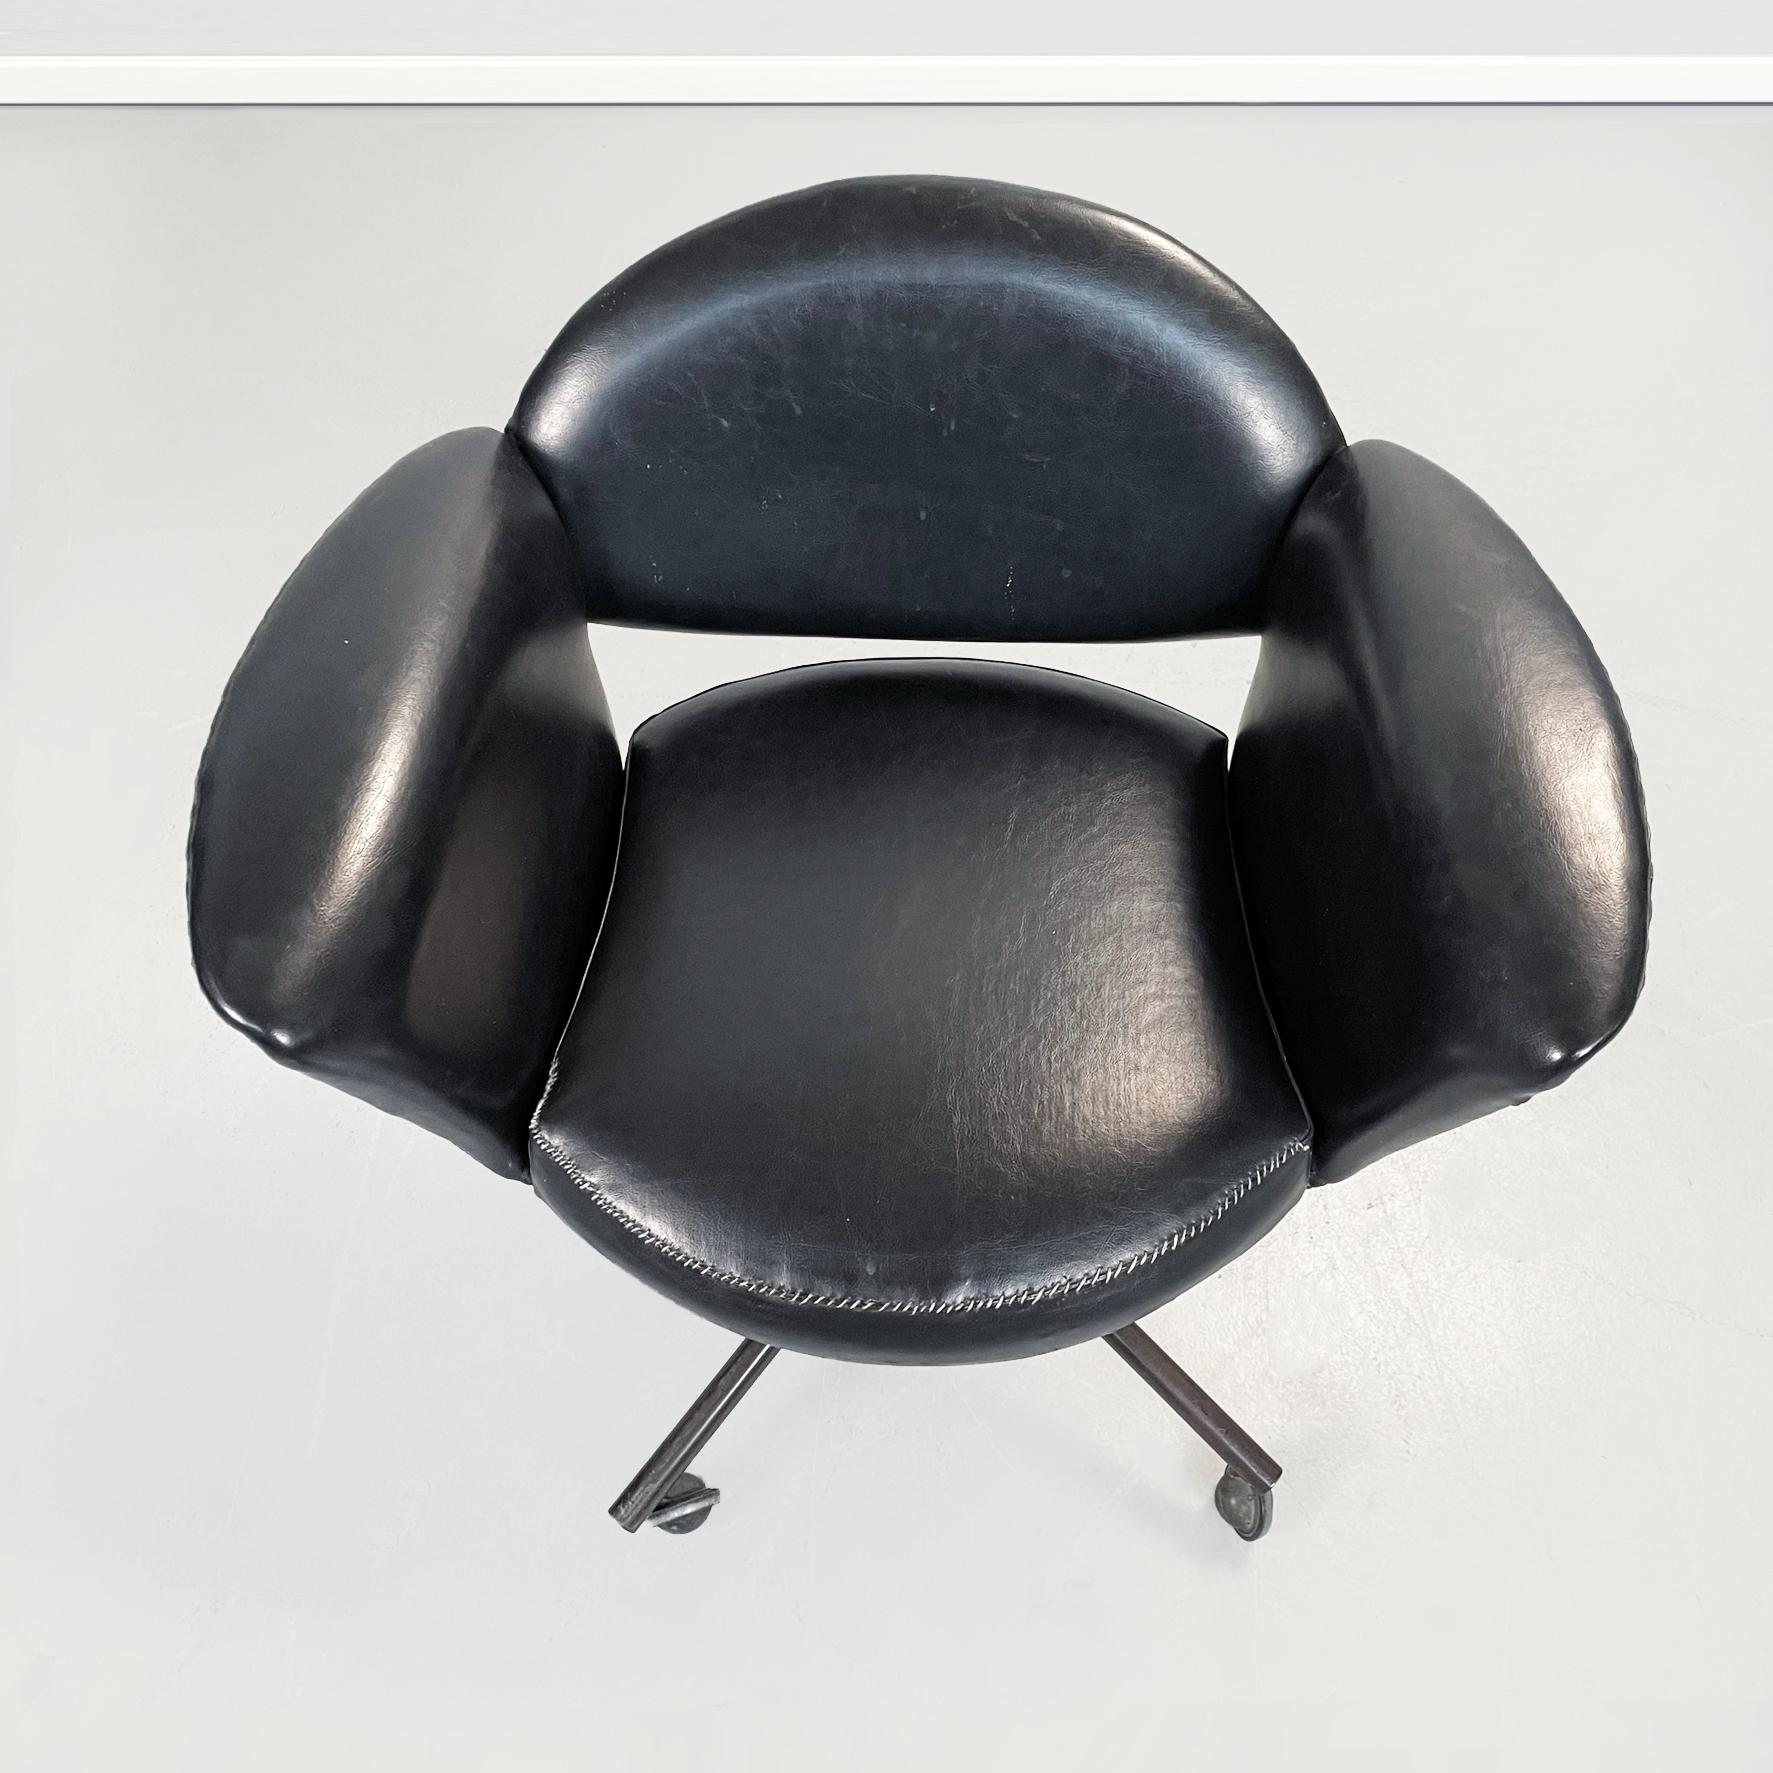 Italian Mid-Century Modern Armchair in Black Leather and Black Metal, 1970s For Sale 1